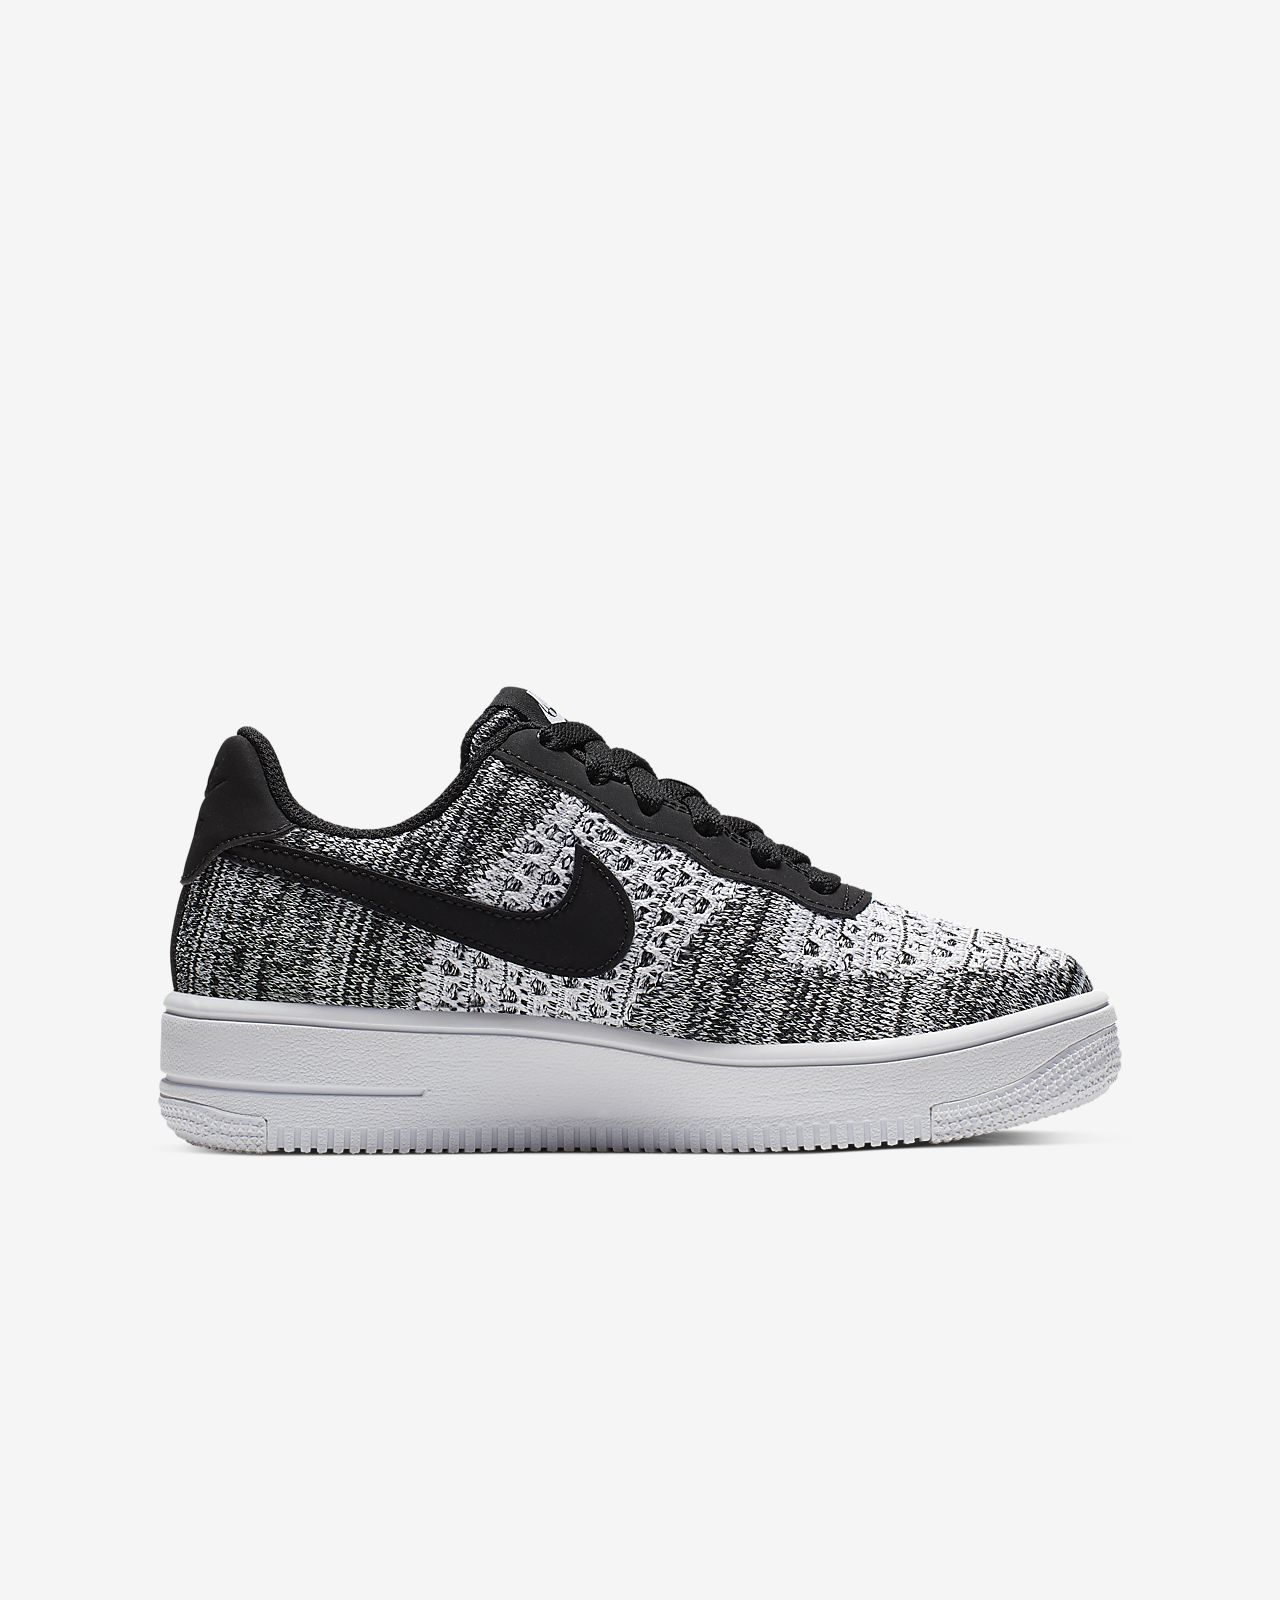 nike air force one flyknit off 69% - www.usushimd.com